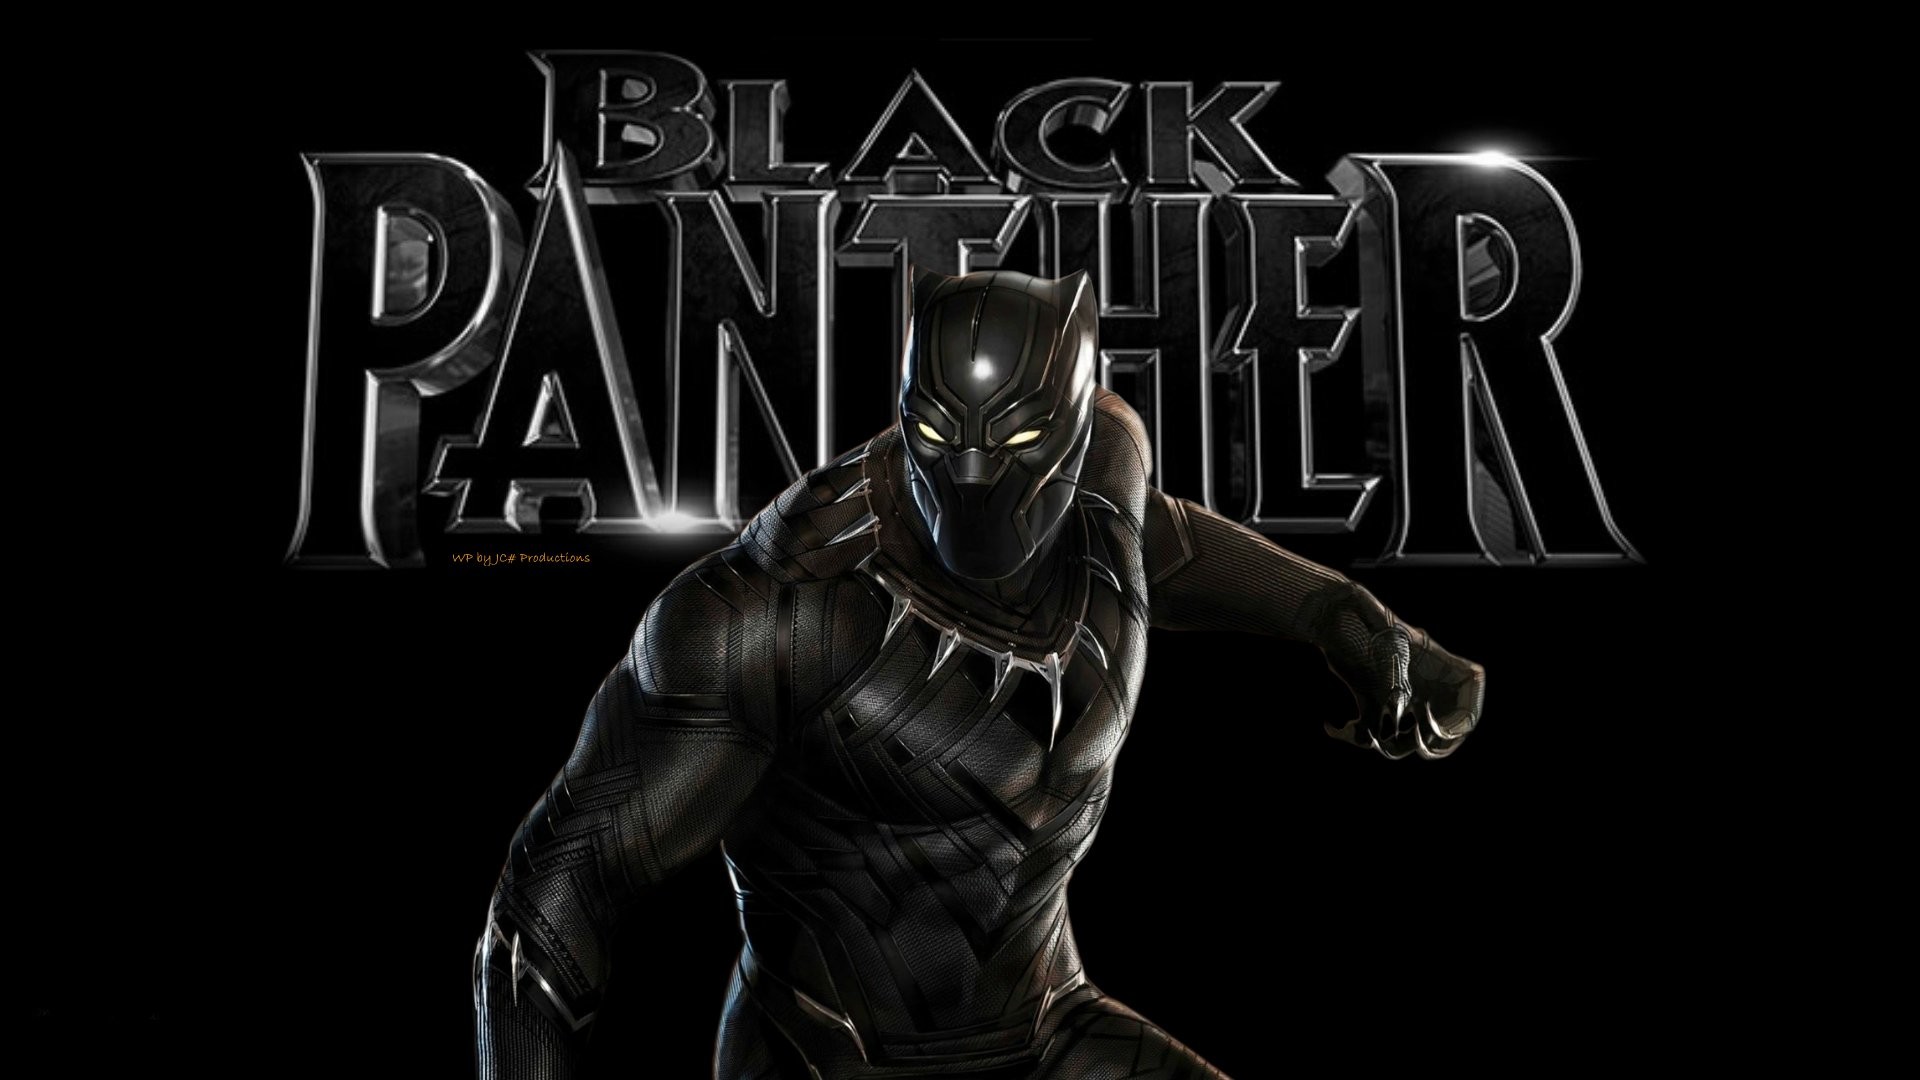 Full Hd Black Panther Wallpaper 3d - x-anythingcouldhappen-x